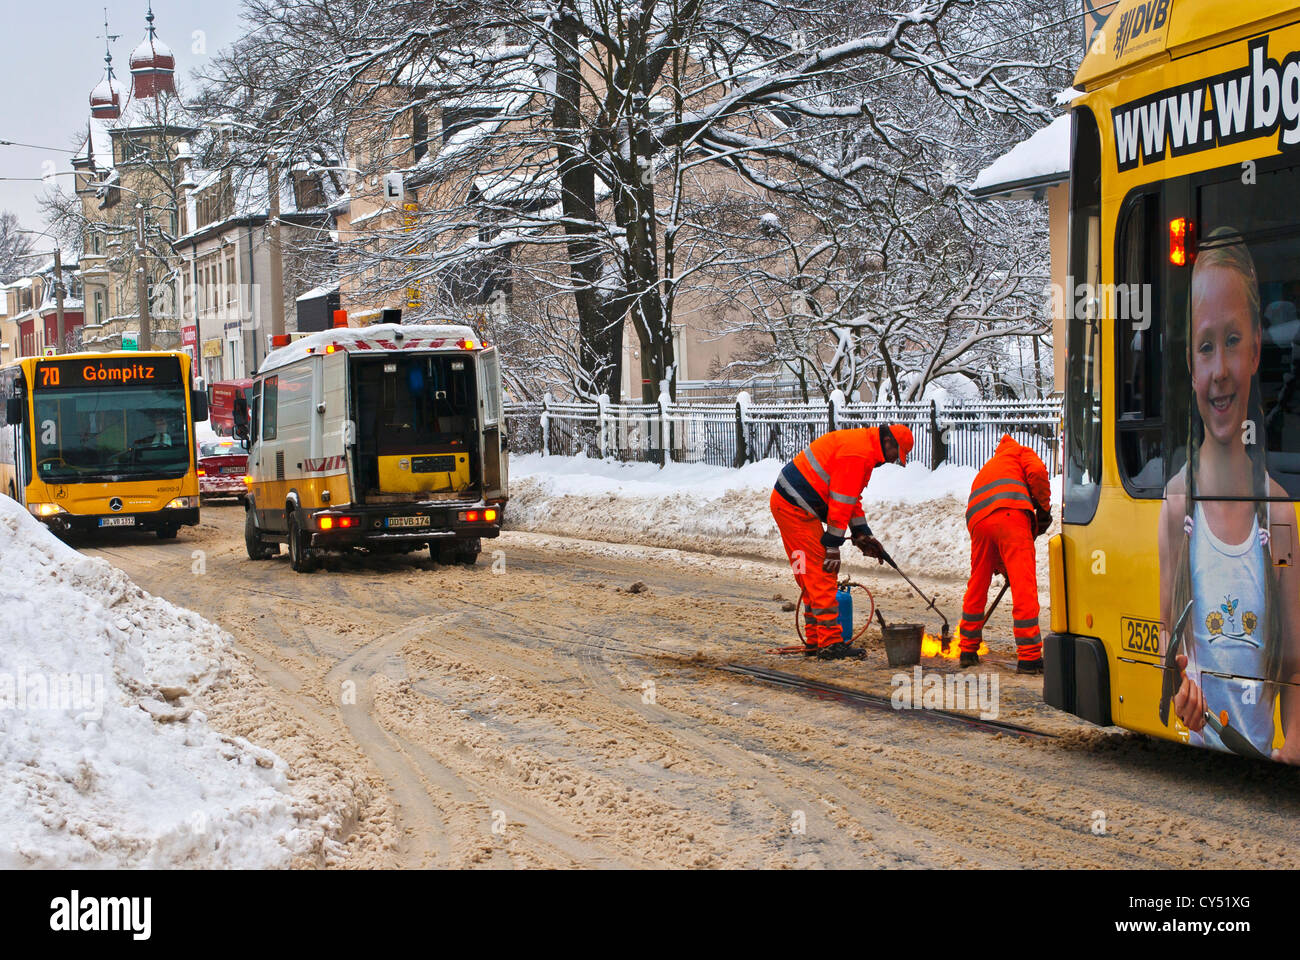 Works on the rails of a tram in a traffic chaos in winter, Dresden, Germany. Stock Photo